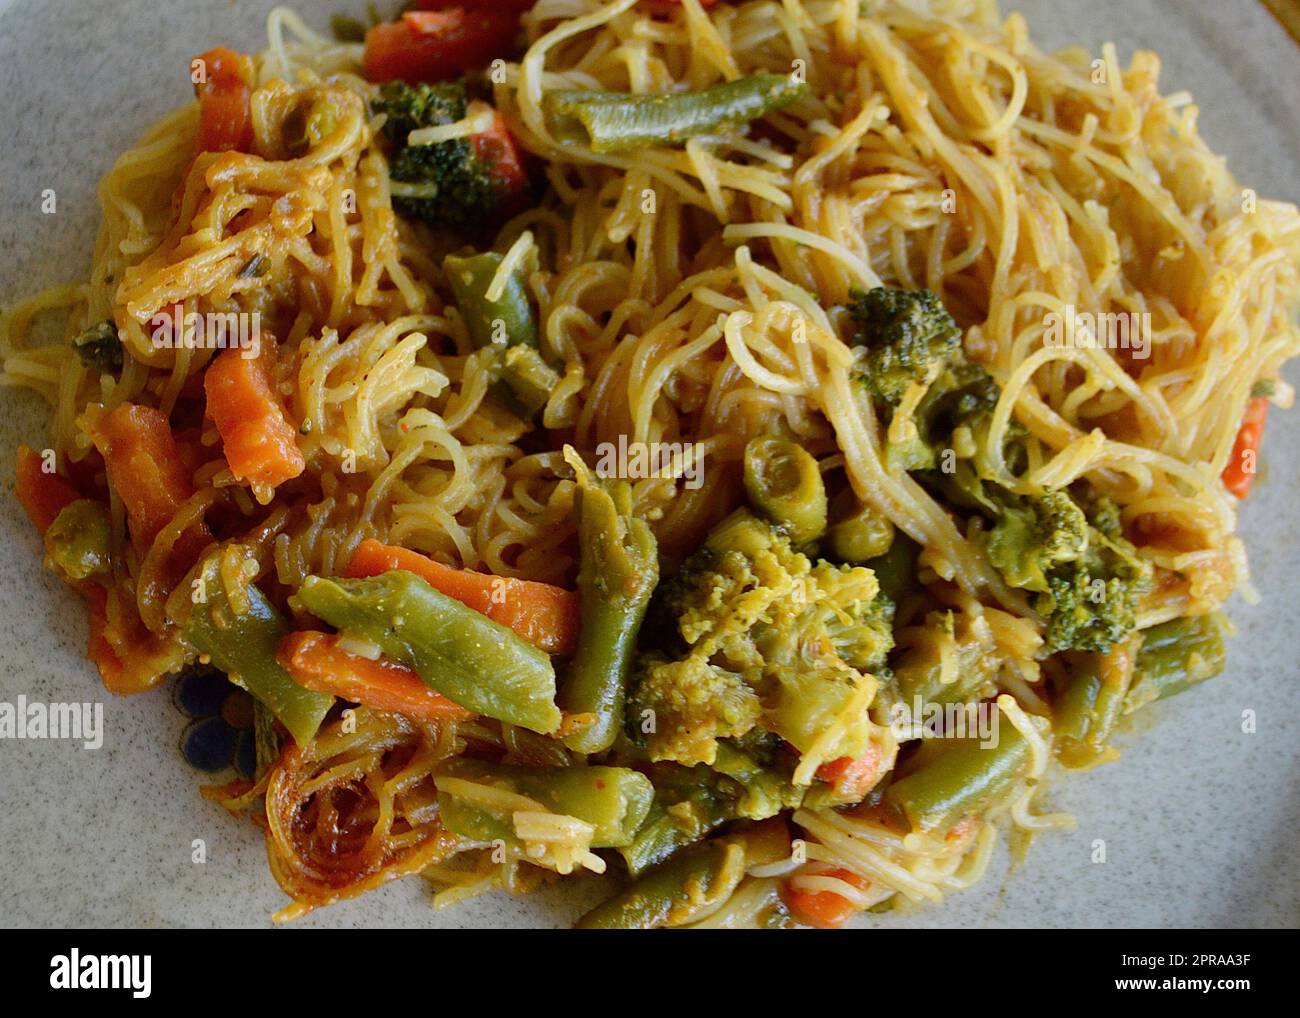 Singapore noodles and vegetables Stock Photo